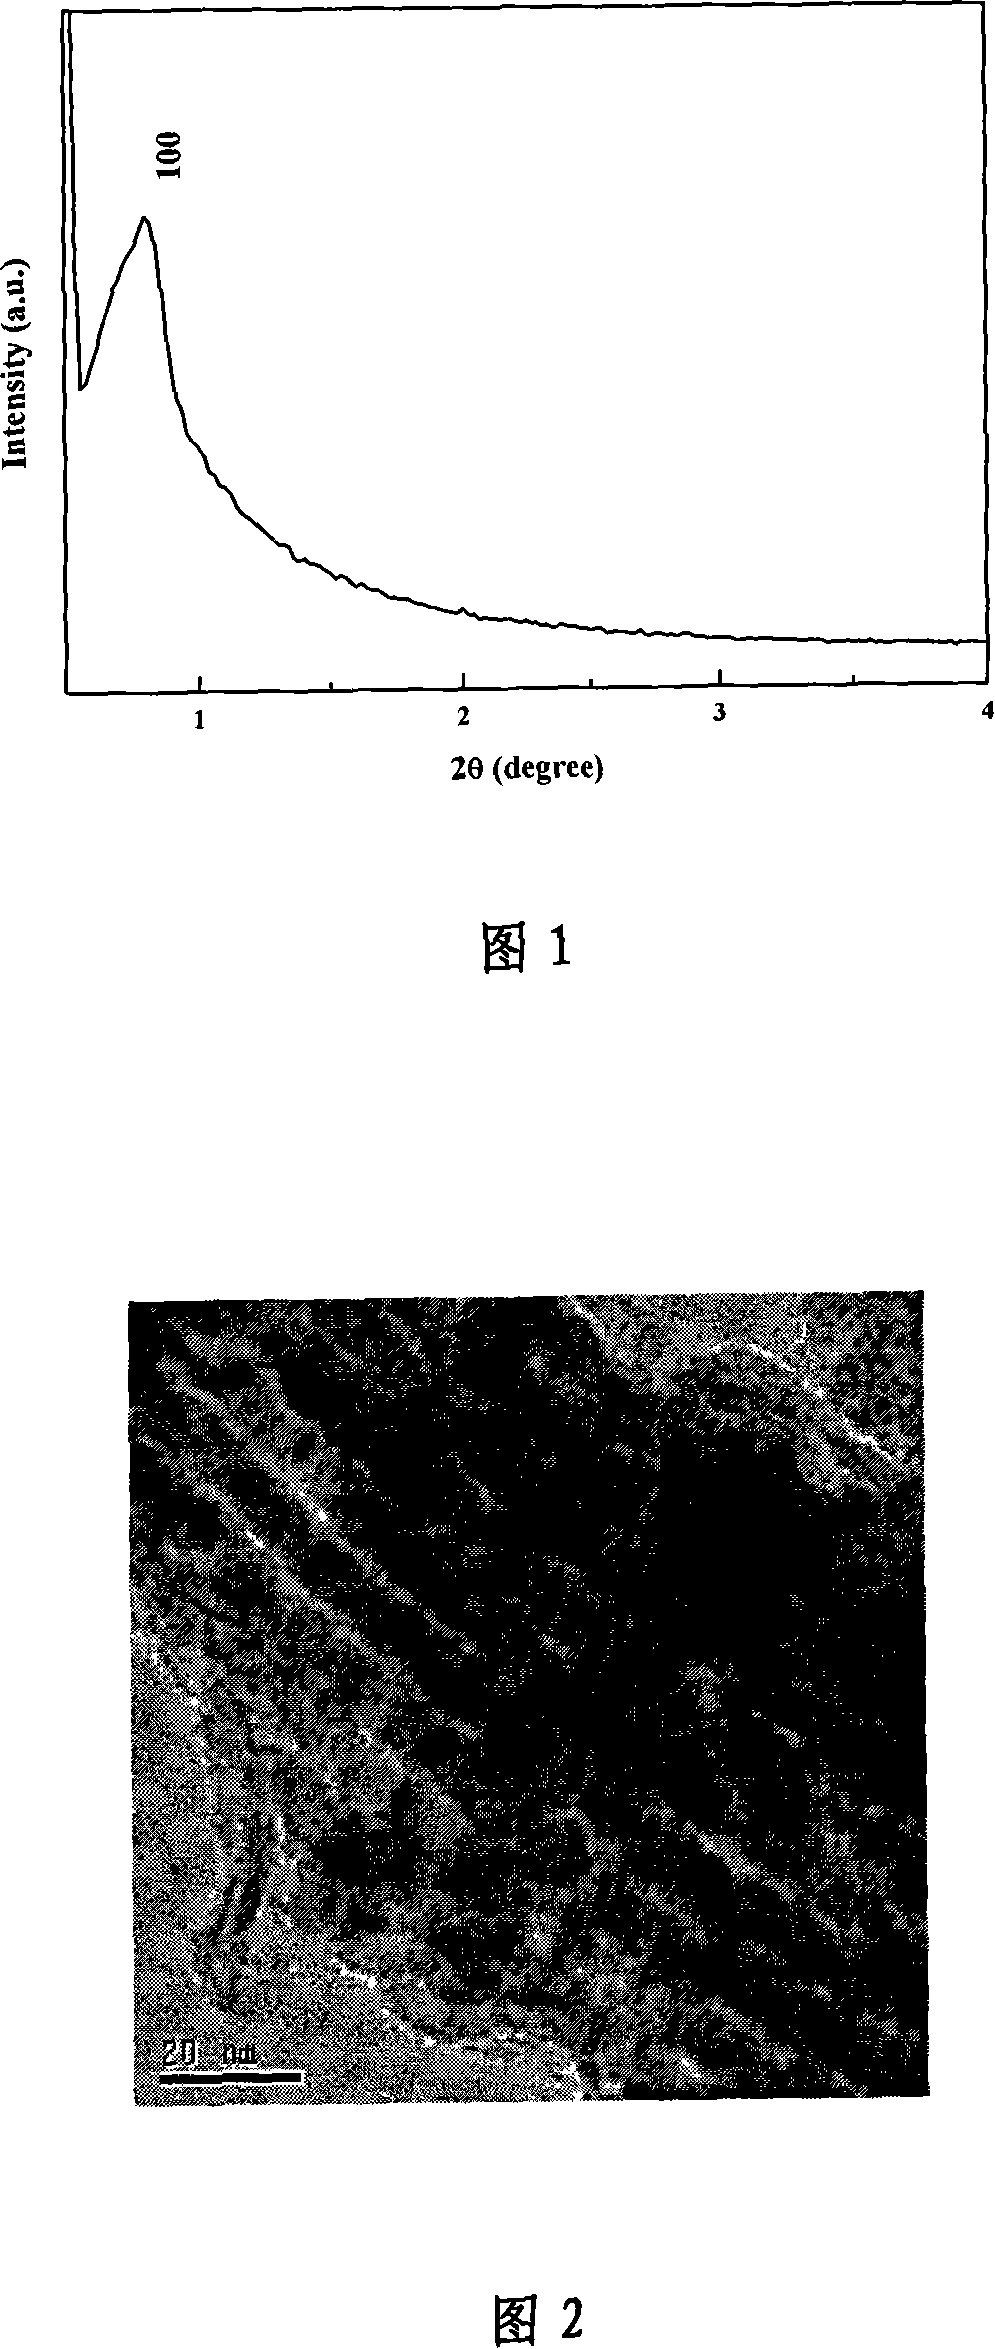 Mesoporous-structure metal nickel catalyst and its preparing method and use